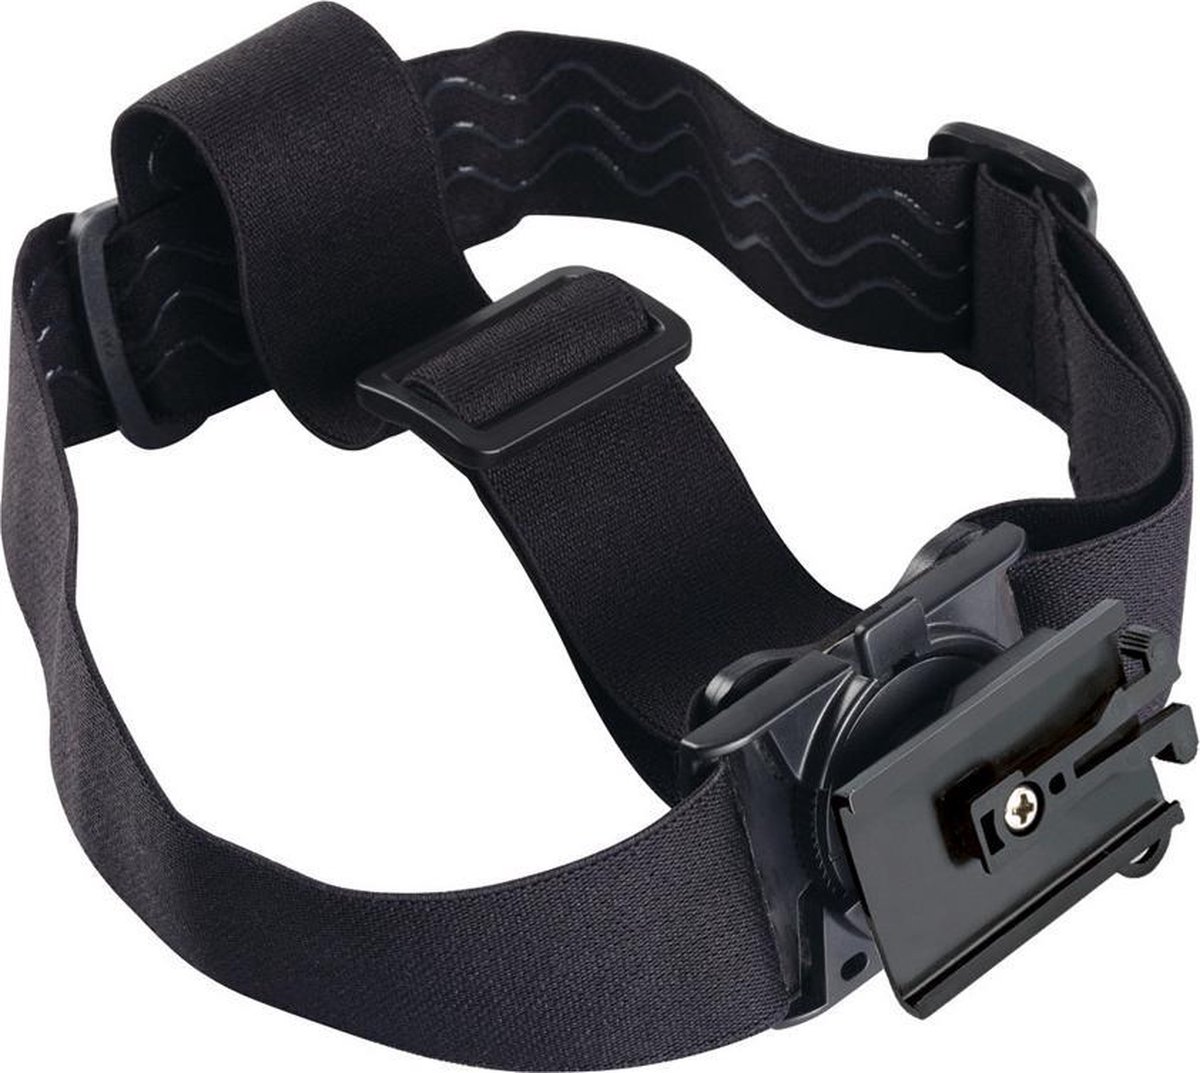 Techvavo® Support serre- Head réglable pour GoPro et Action Camera